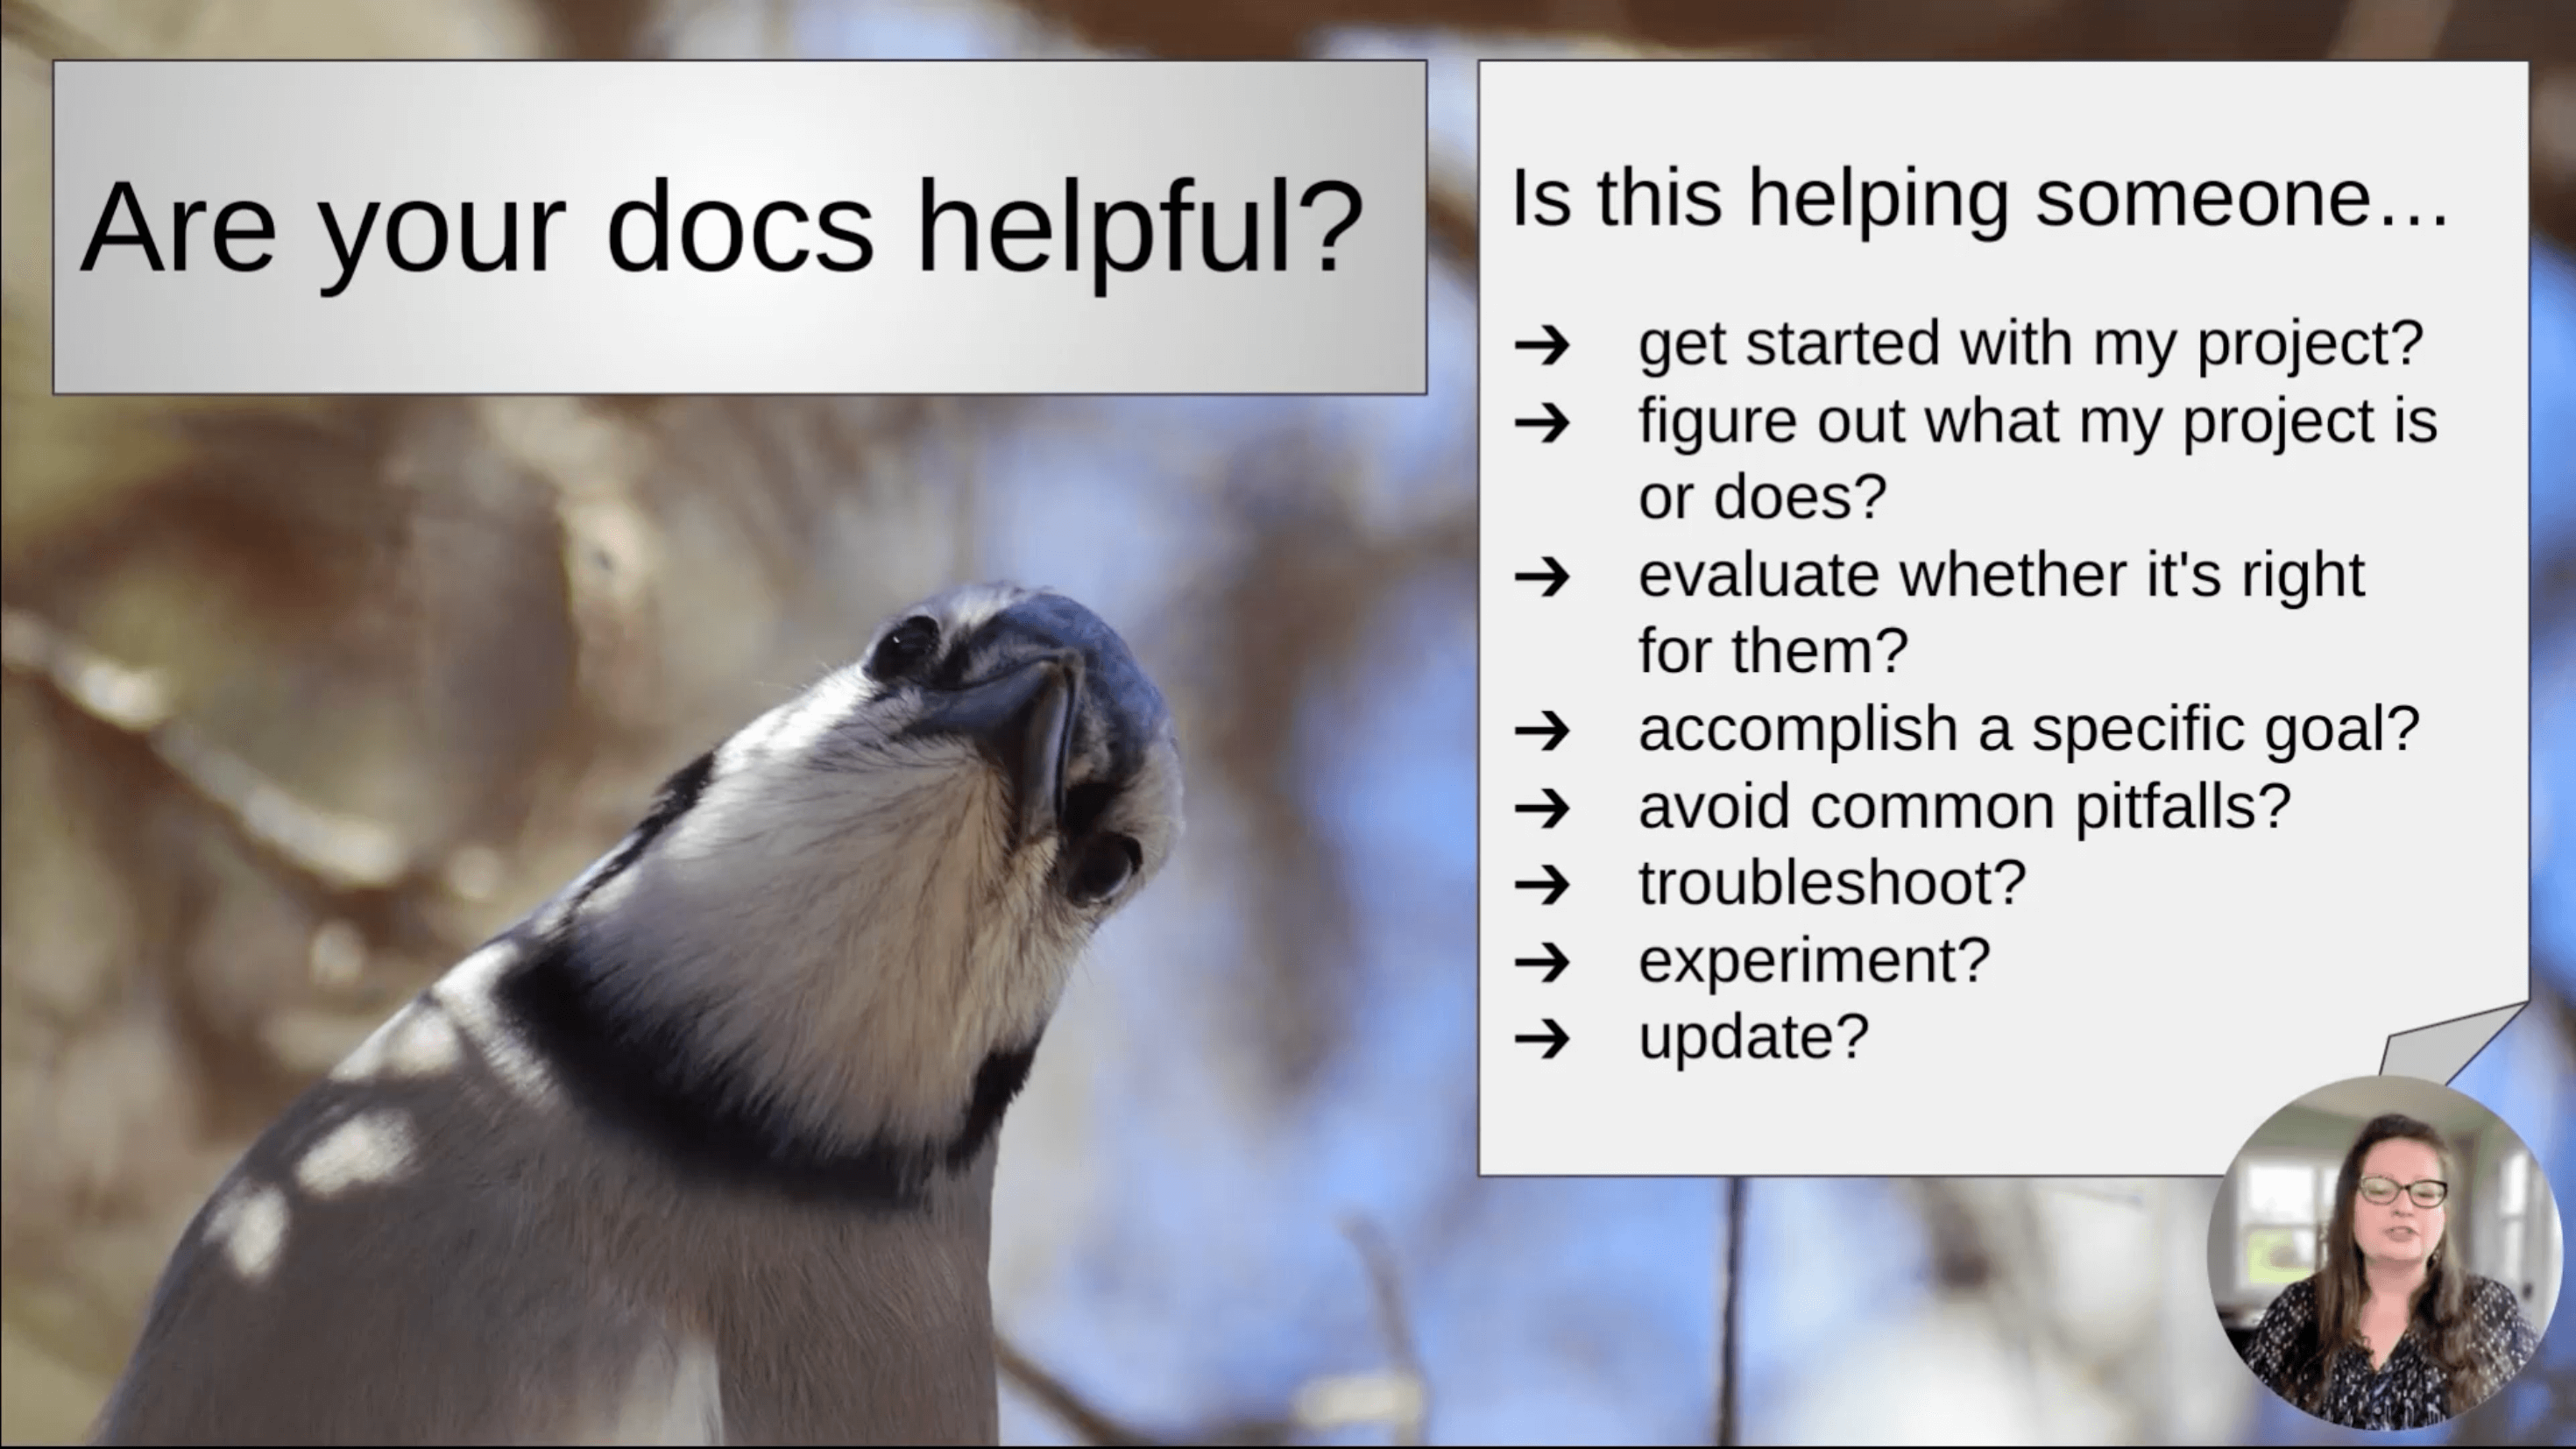 Sarah's slide with a bird as a background. The slide reads: 'Are your docs helpful? Is this helping someone get started with my project? Figure out what my project is or does? Evaluate whether it's right for them? Accomplish a specific goal? Avoid common pitfalls? Troubleshoot? Experiment? Update?